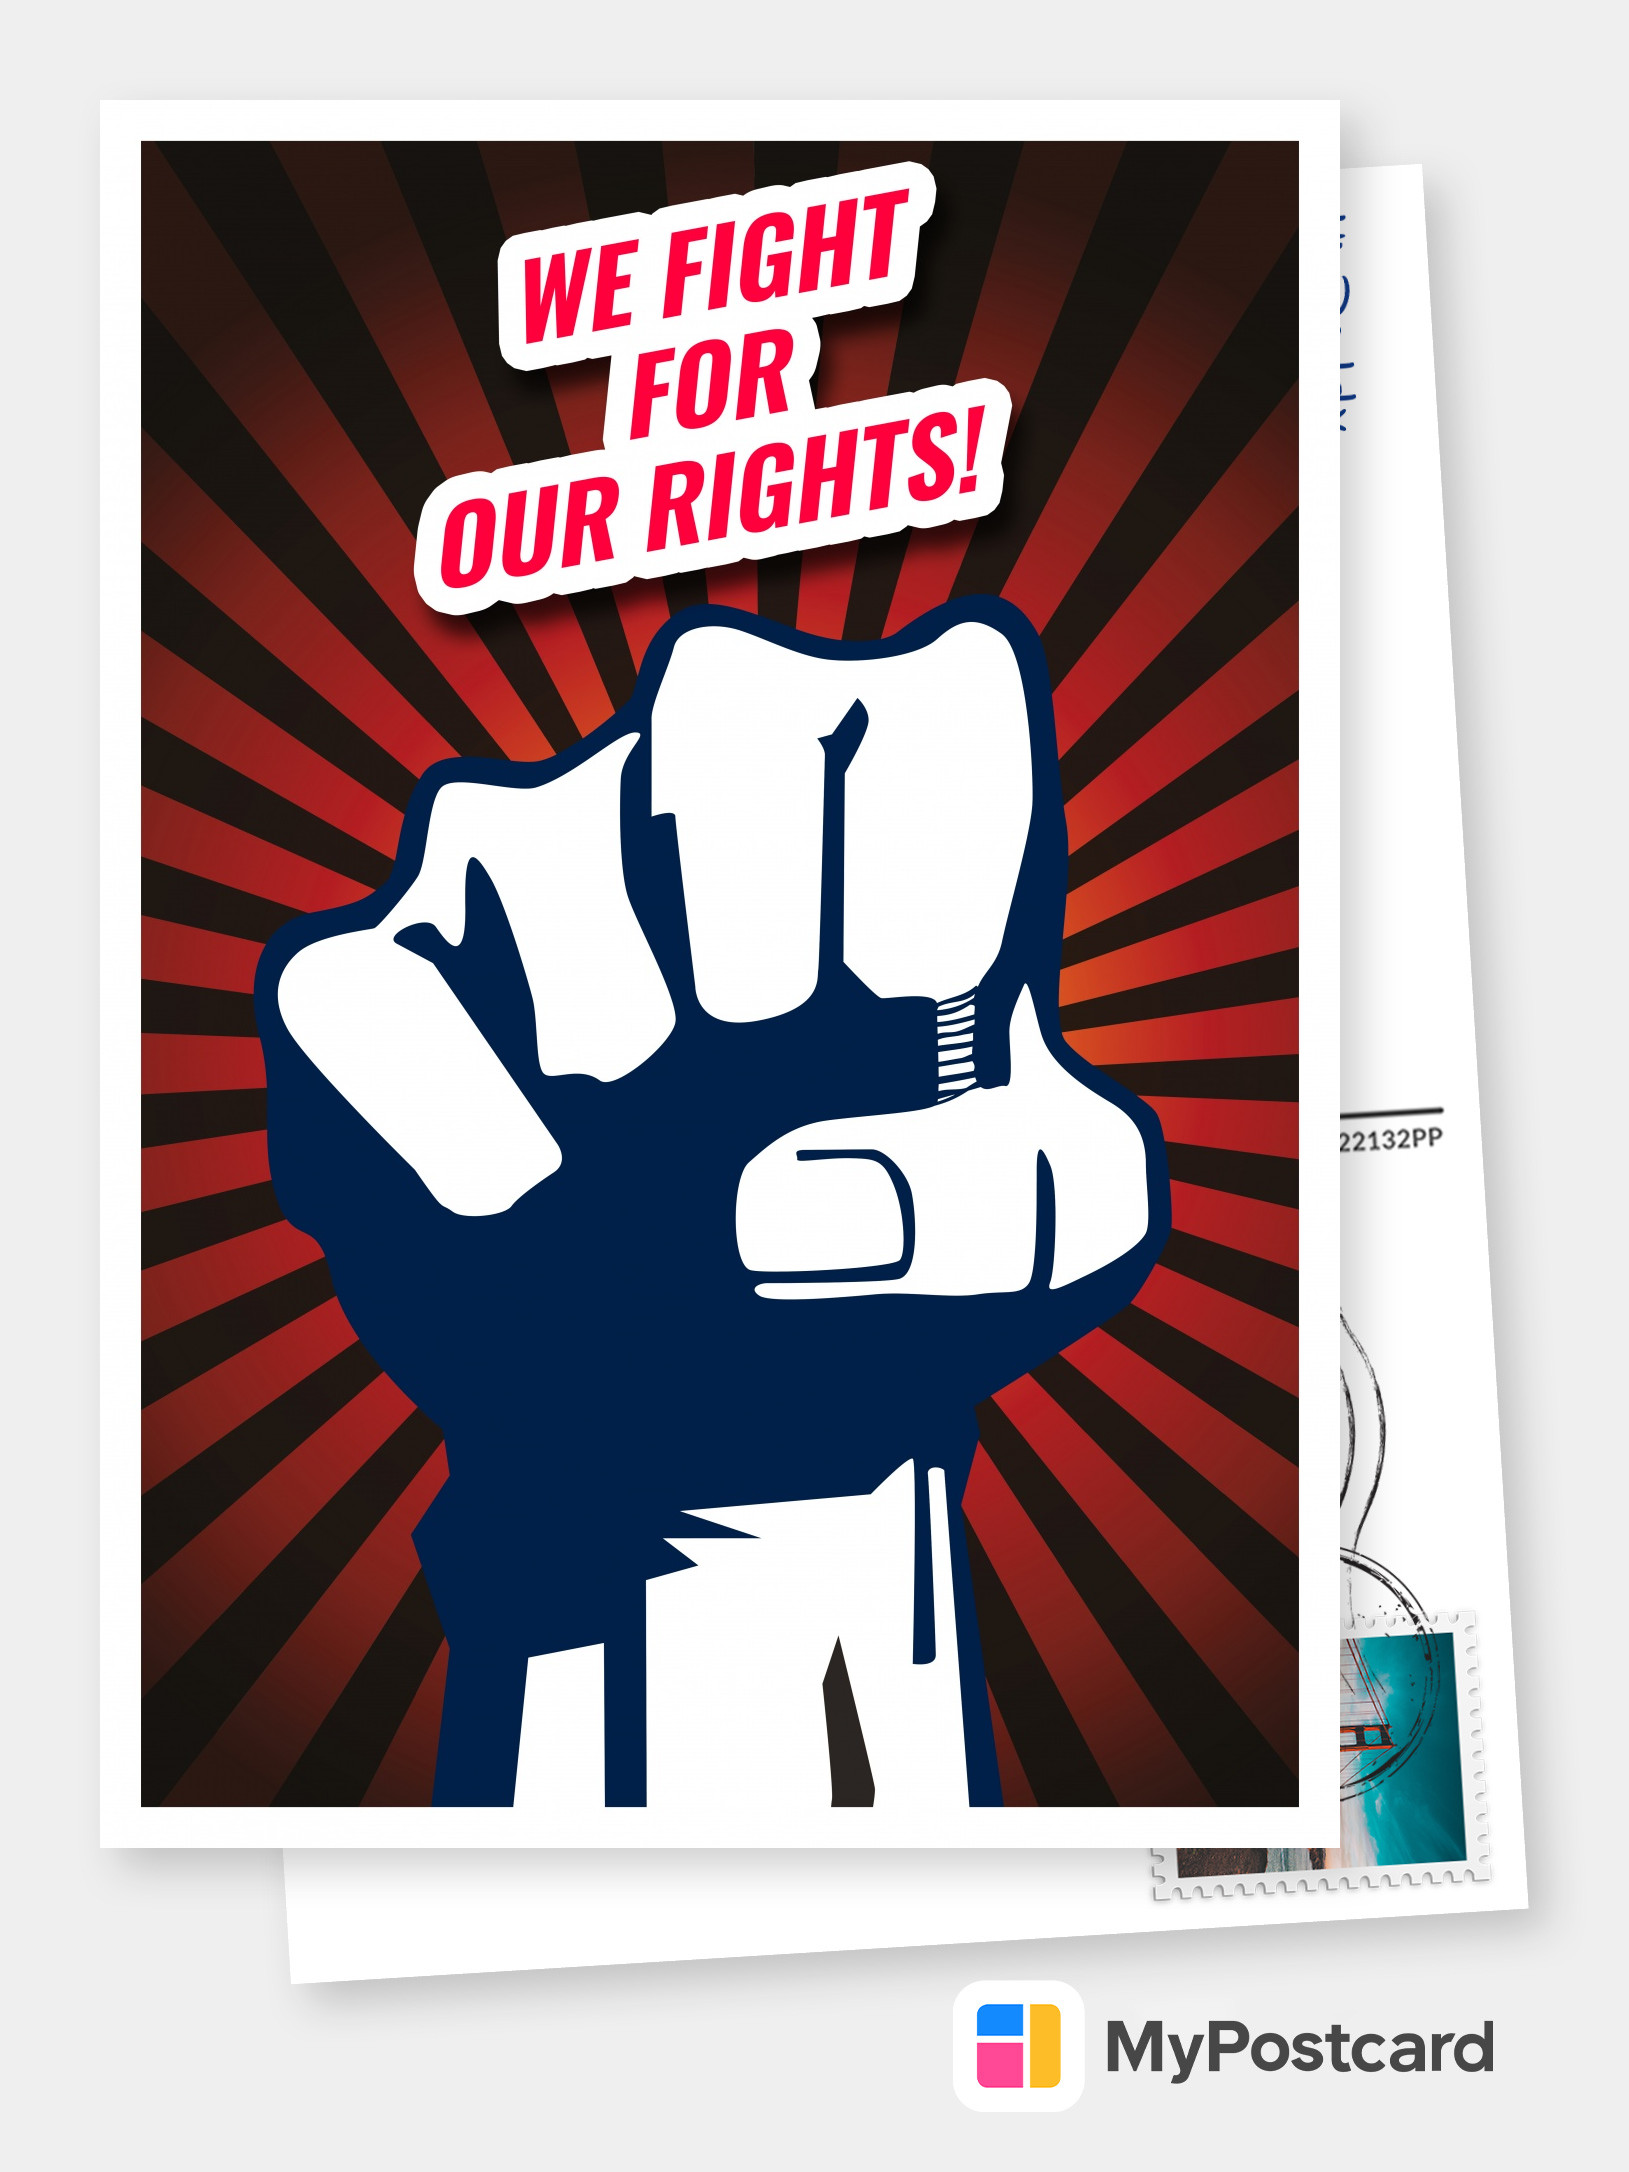 We Wants Our Rights And We